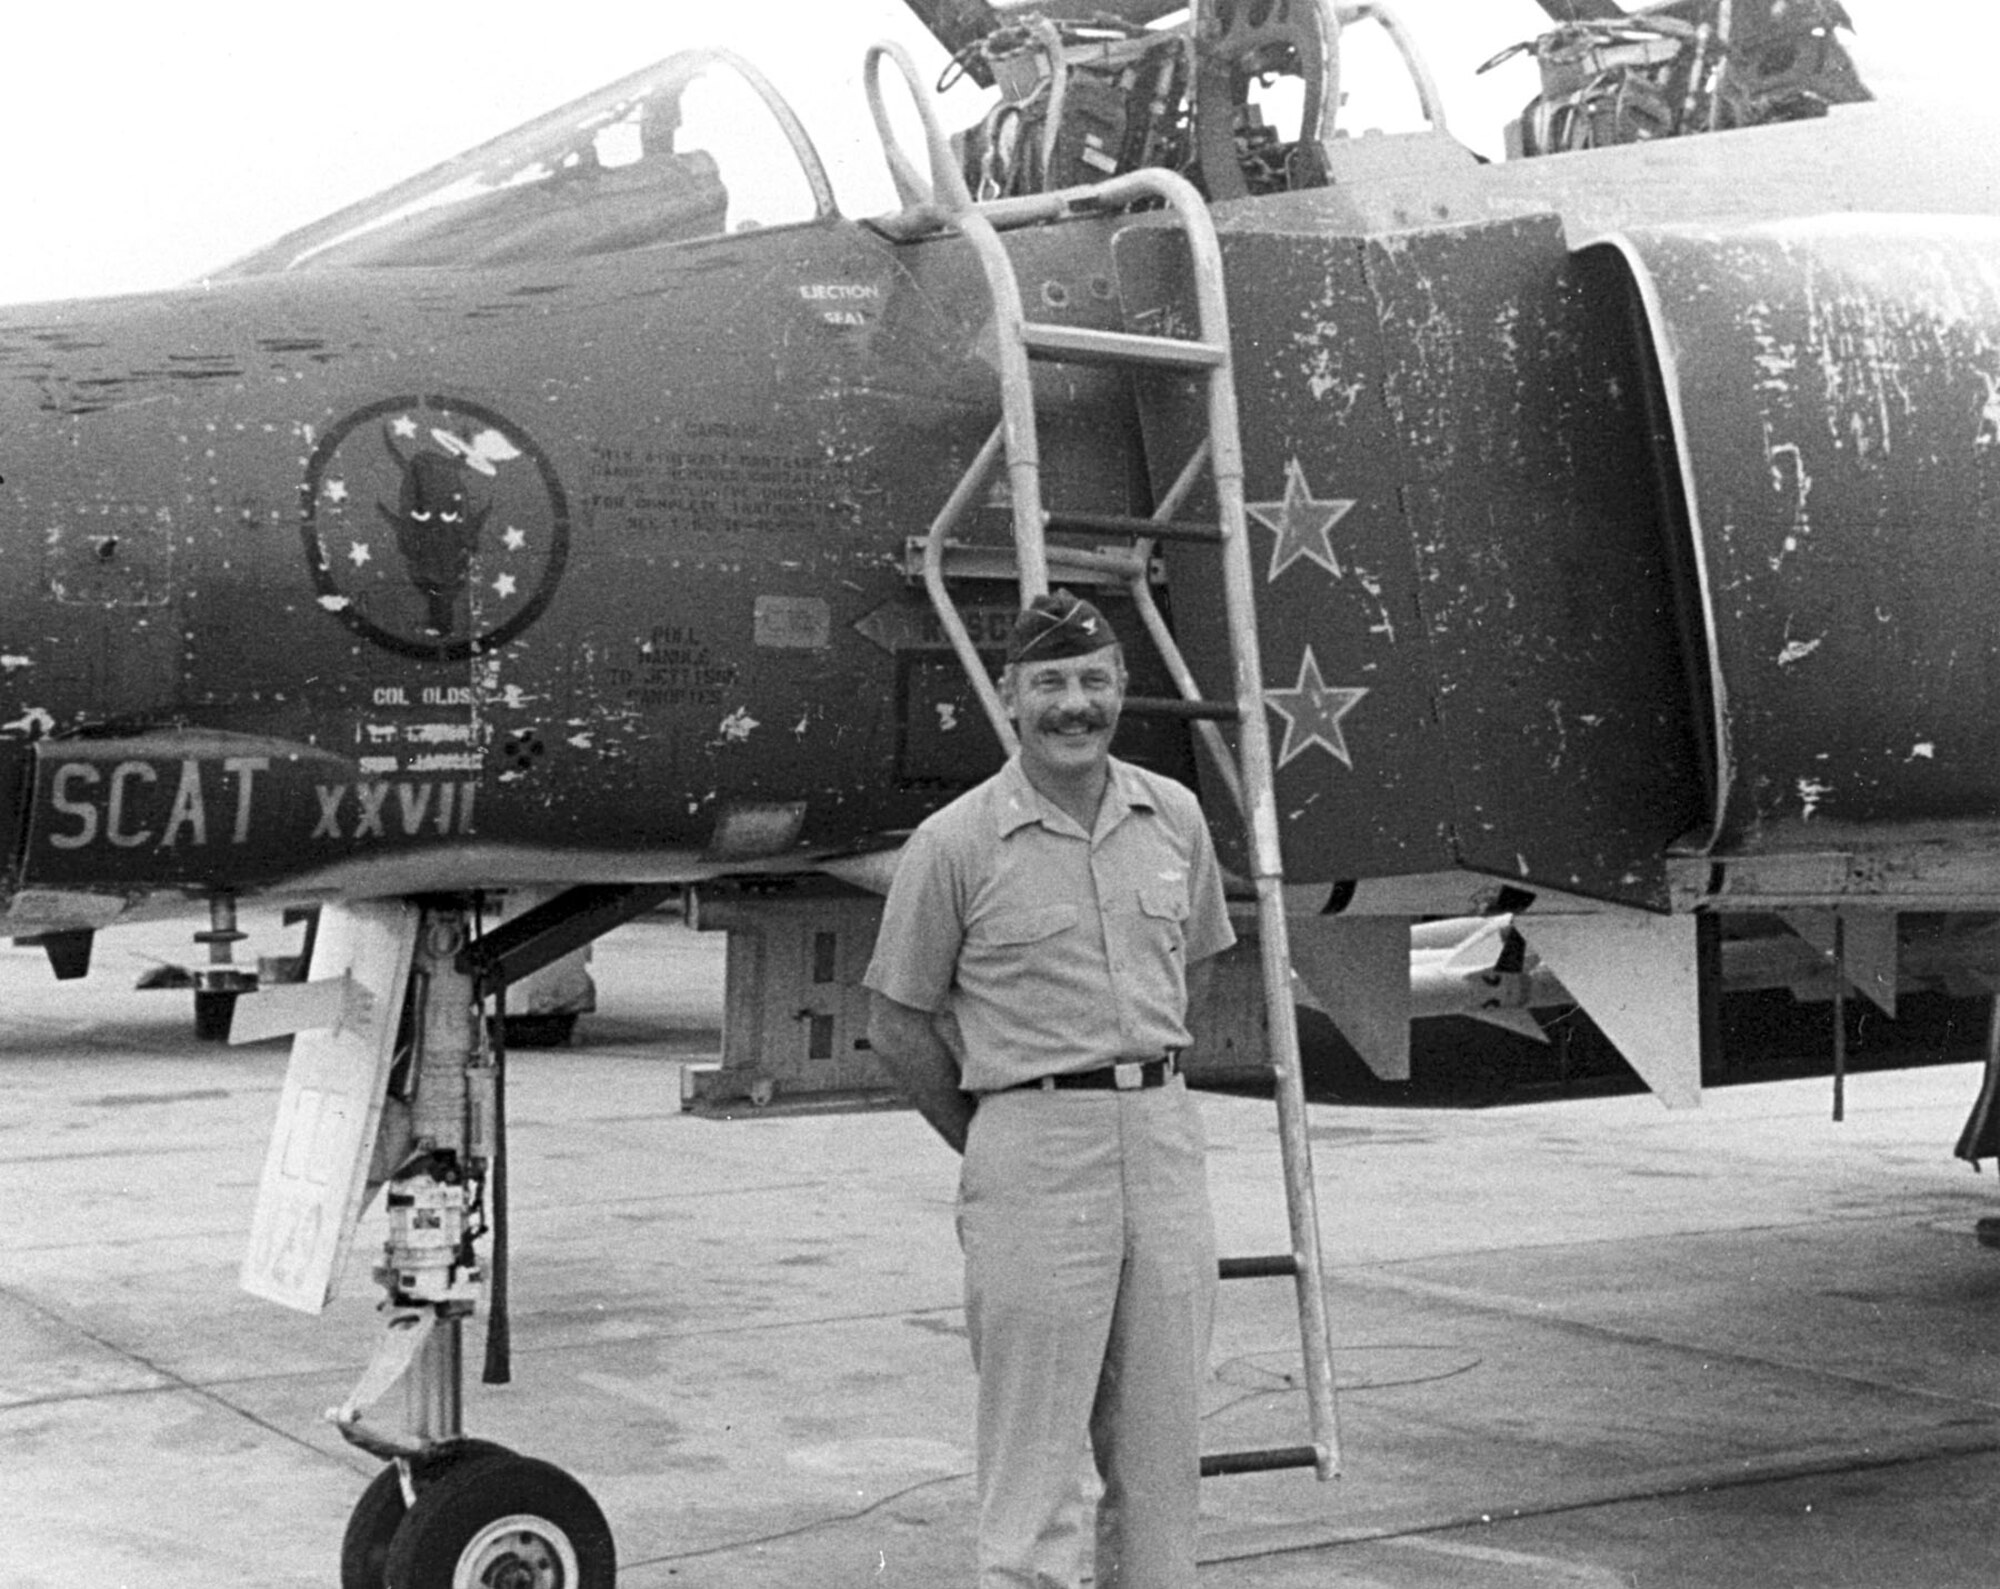 Col. Robin Olds with F-4C "Scat XXVII." (U.S. Air Force photo)